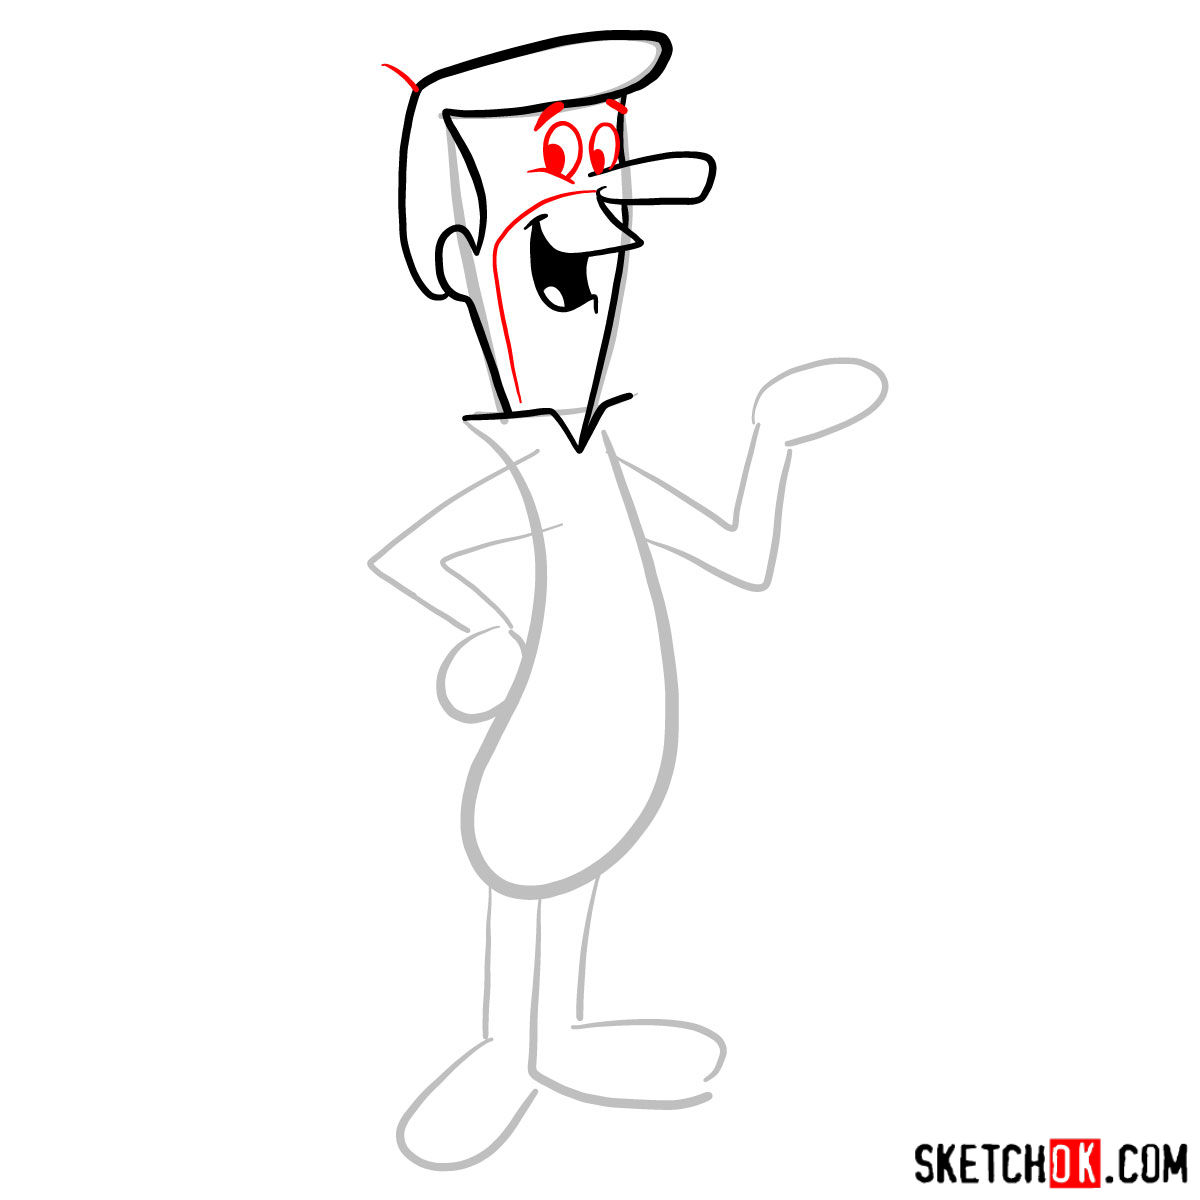 How to draw George Jetson - step 04